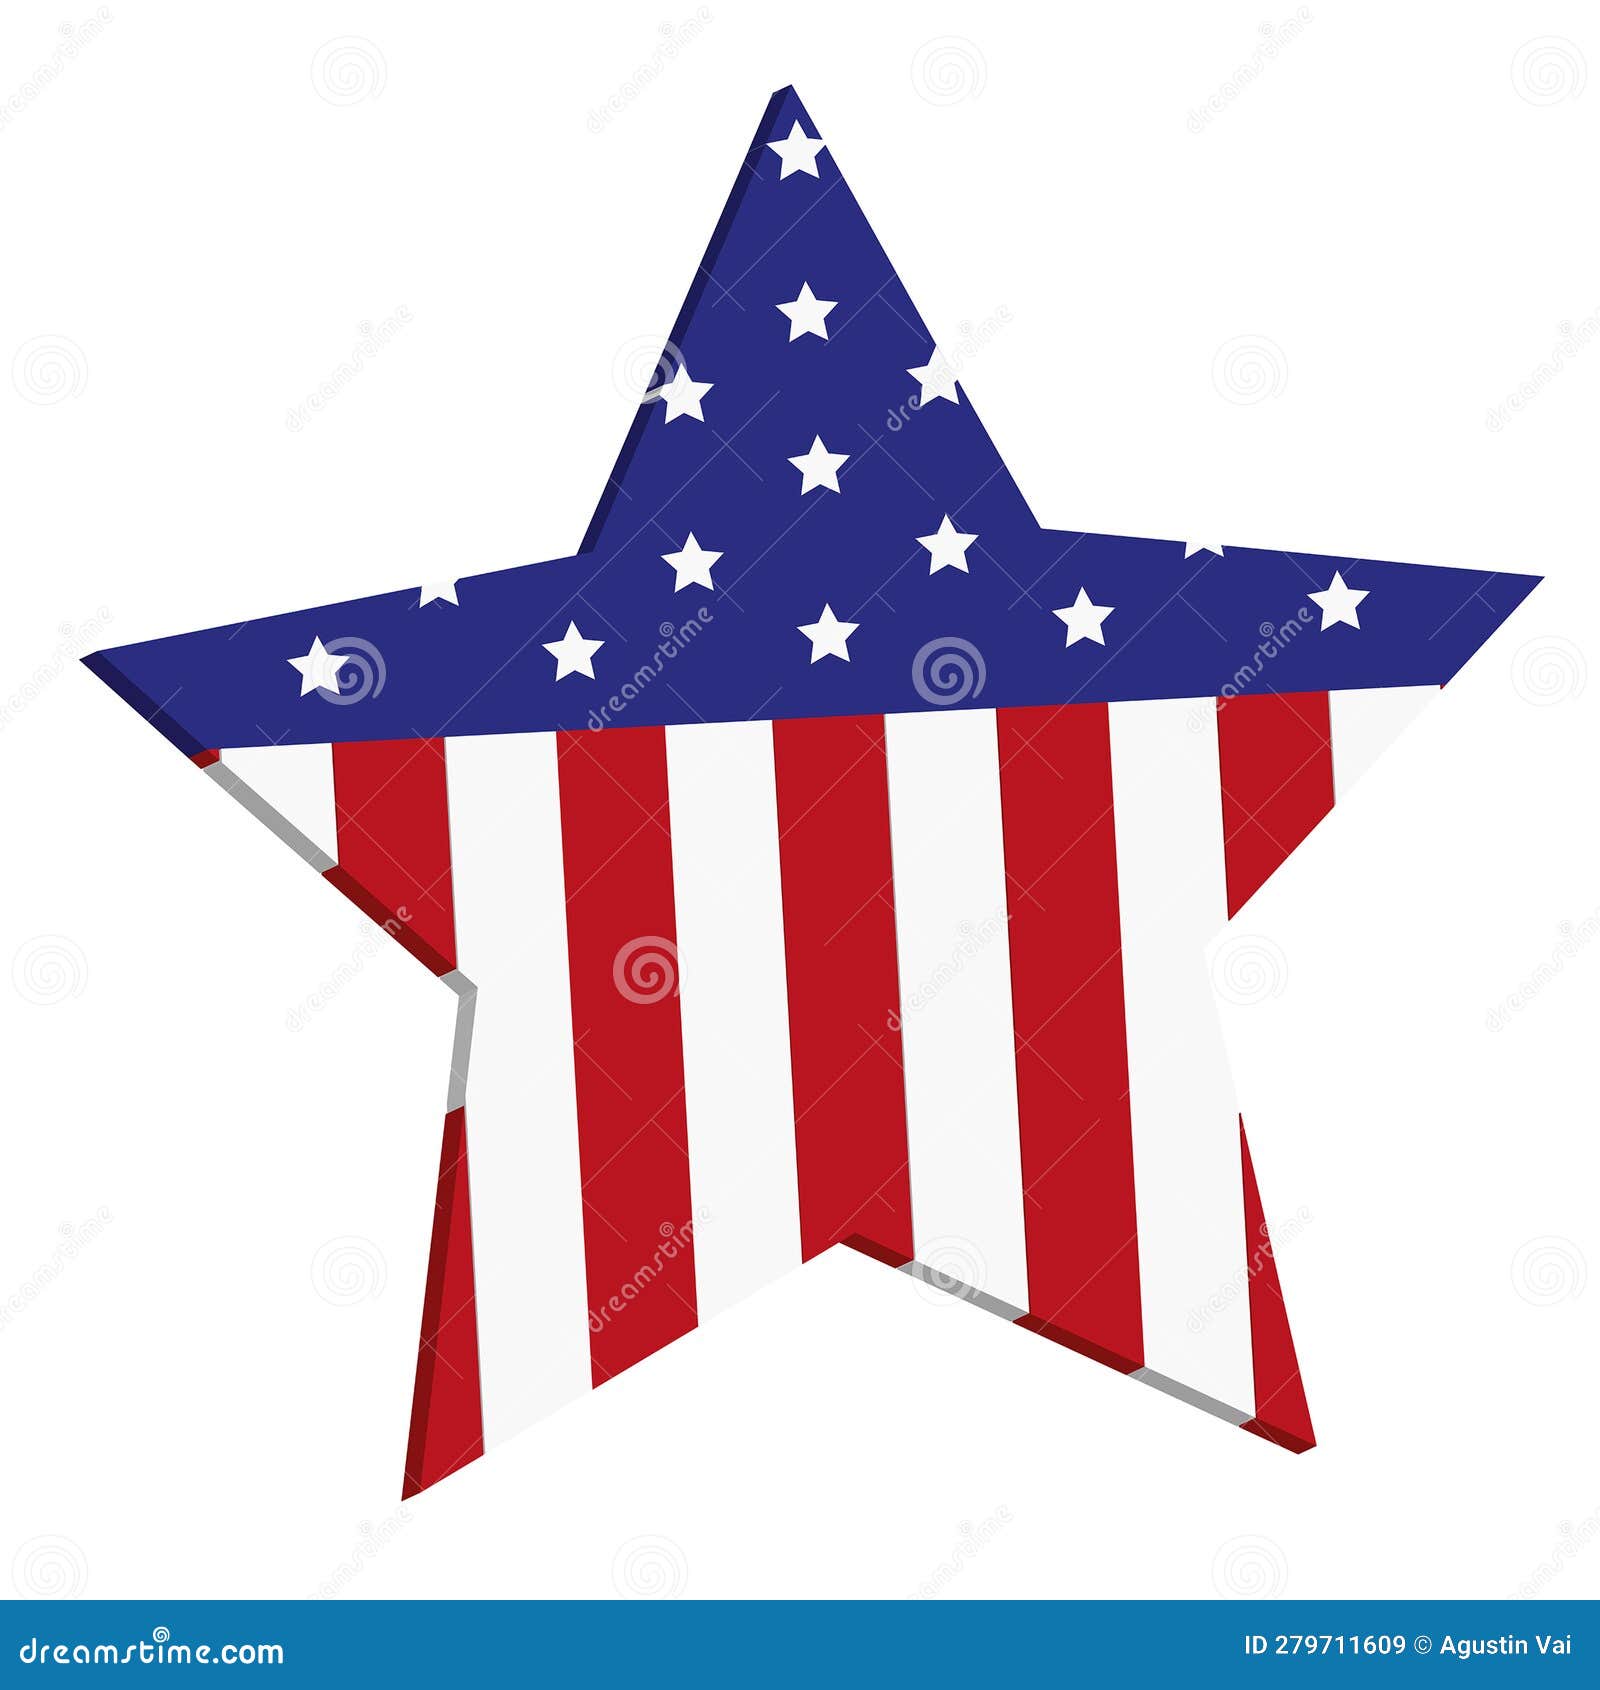 tridimensional star with north american flag on a white background with copy space